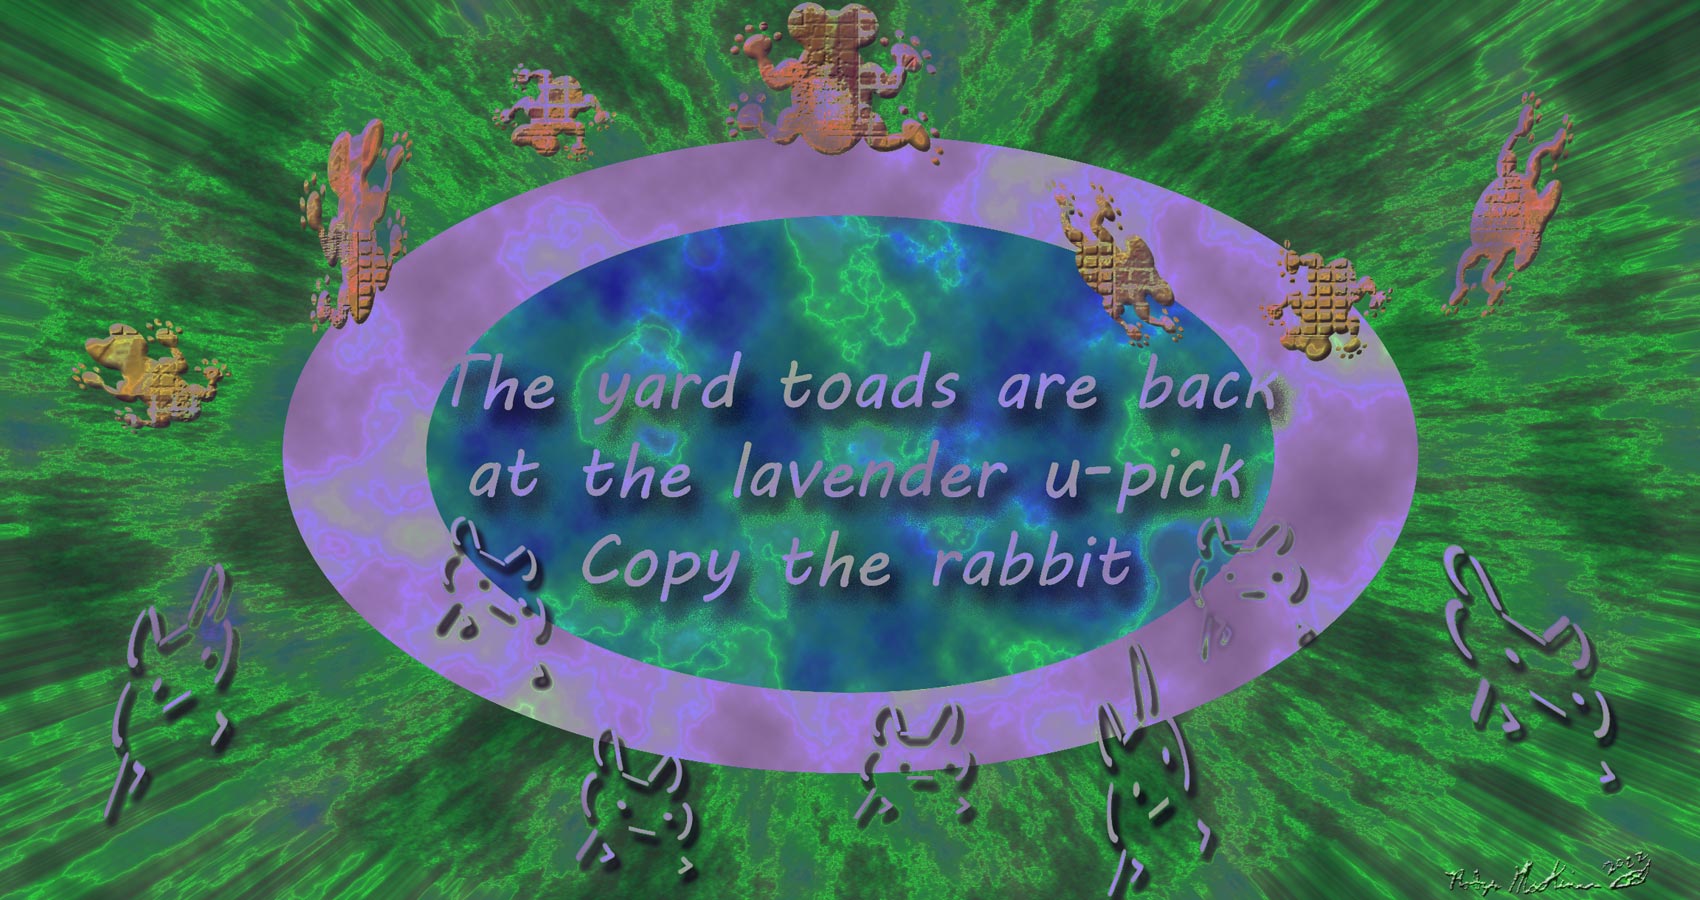 At The Lavender U-Pick, haiku by Robyn MacKinnon at Spillwords.com